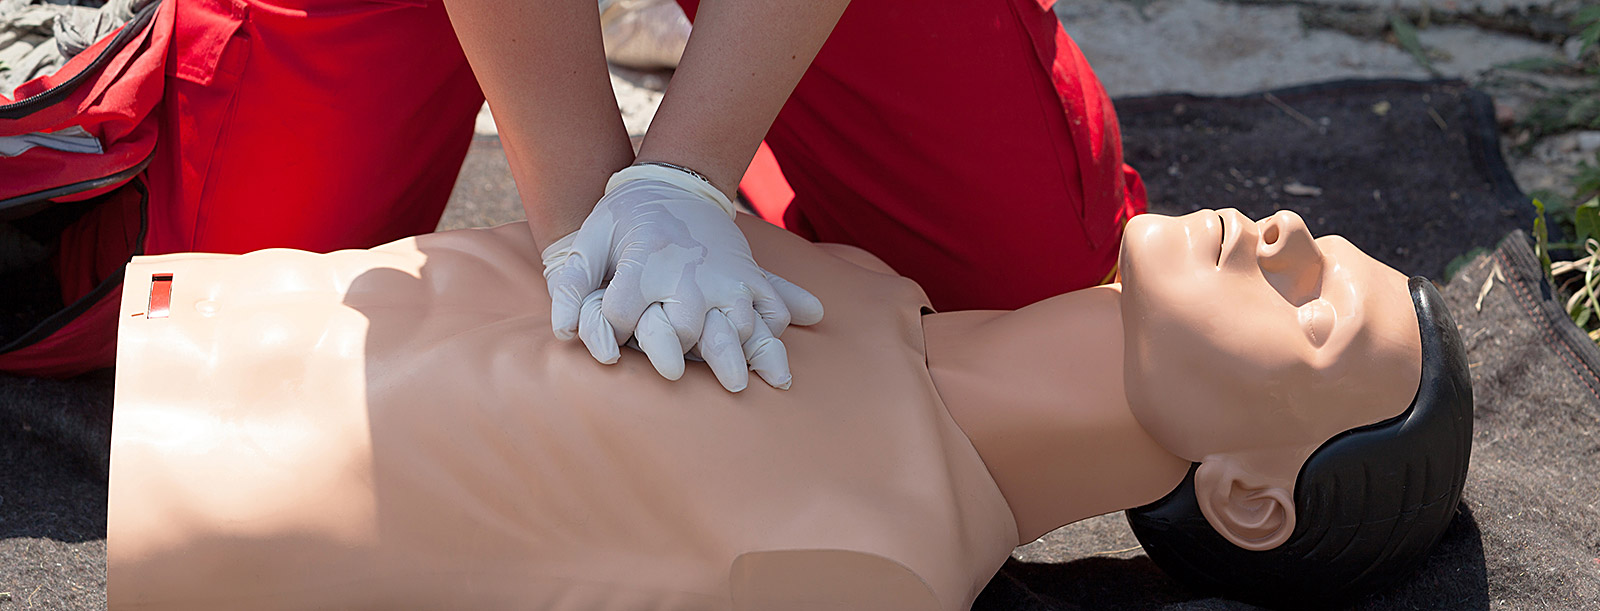 hands performing chest compressions on dummy